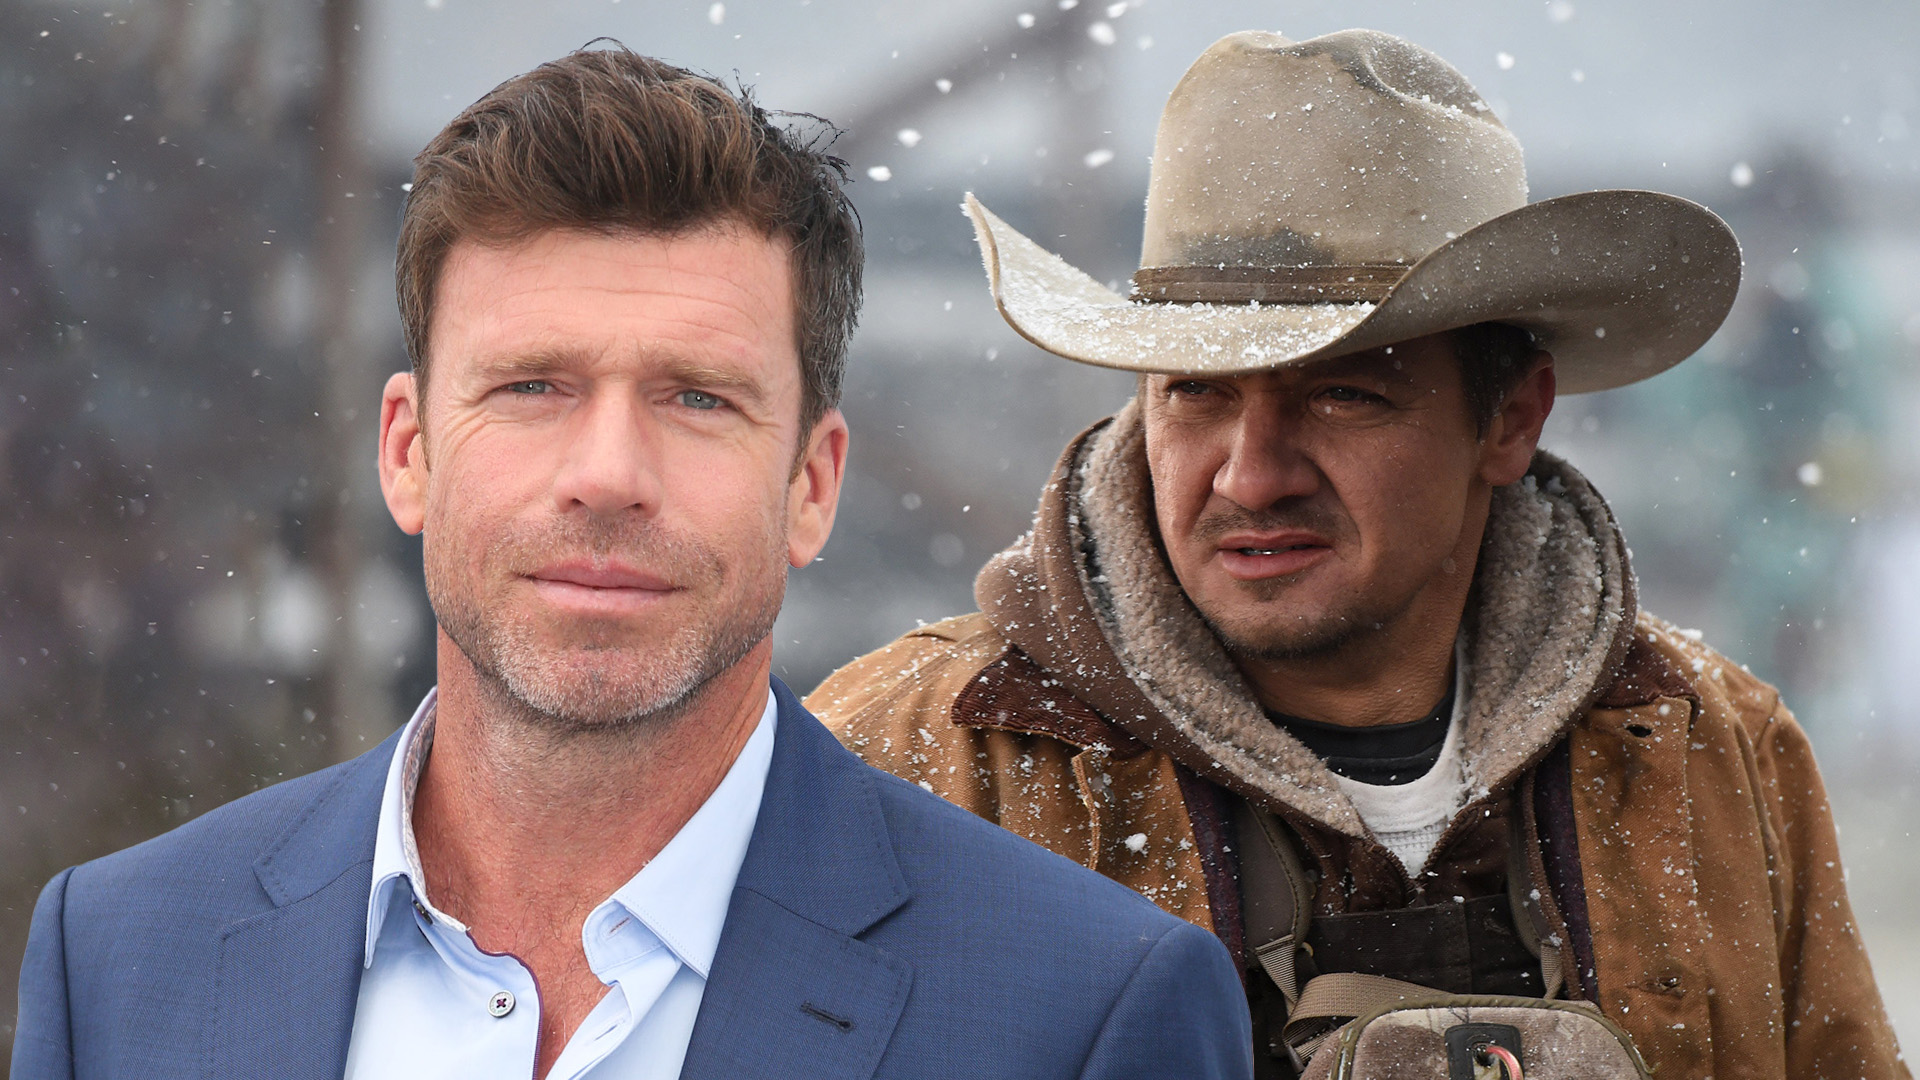 The List of All the Taylor Sheridan's Movies & TV Shows – And Where To Watch Them